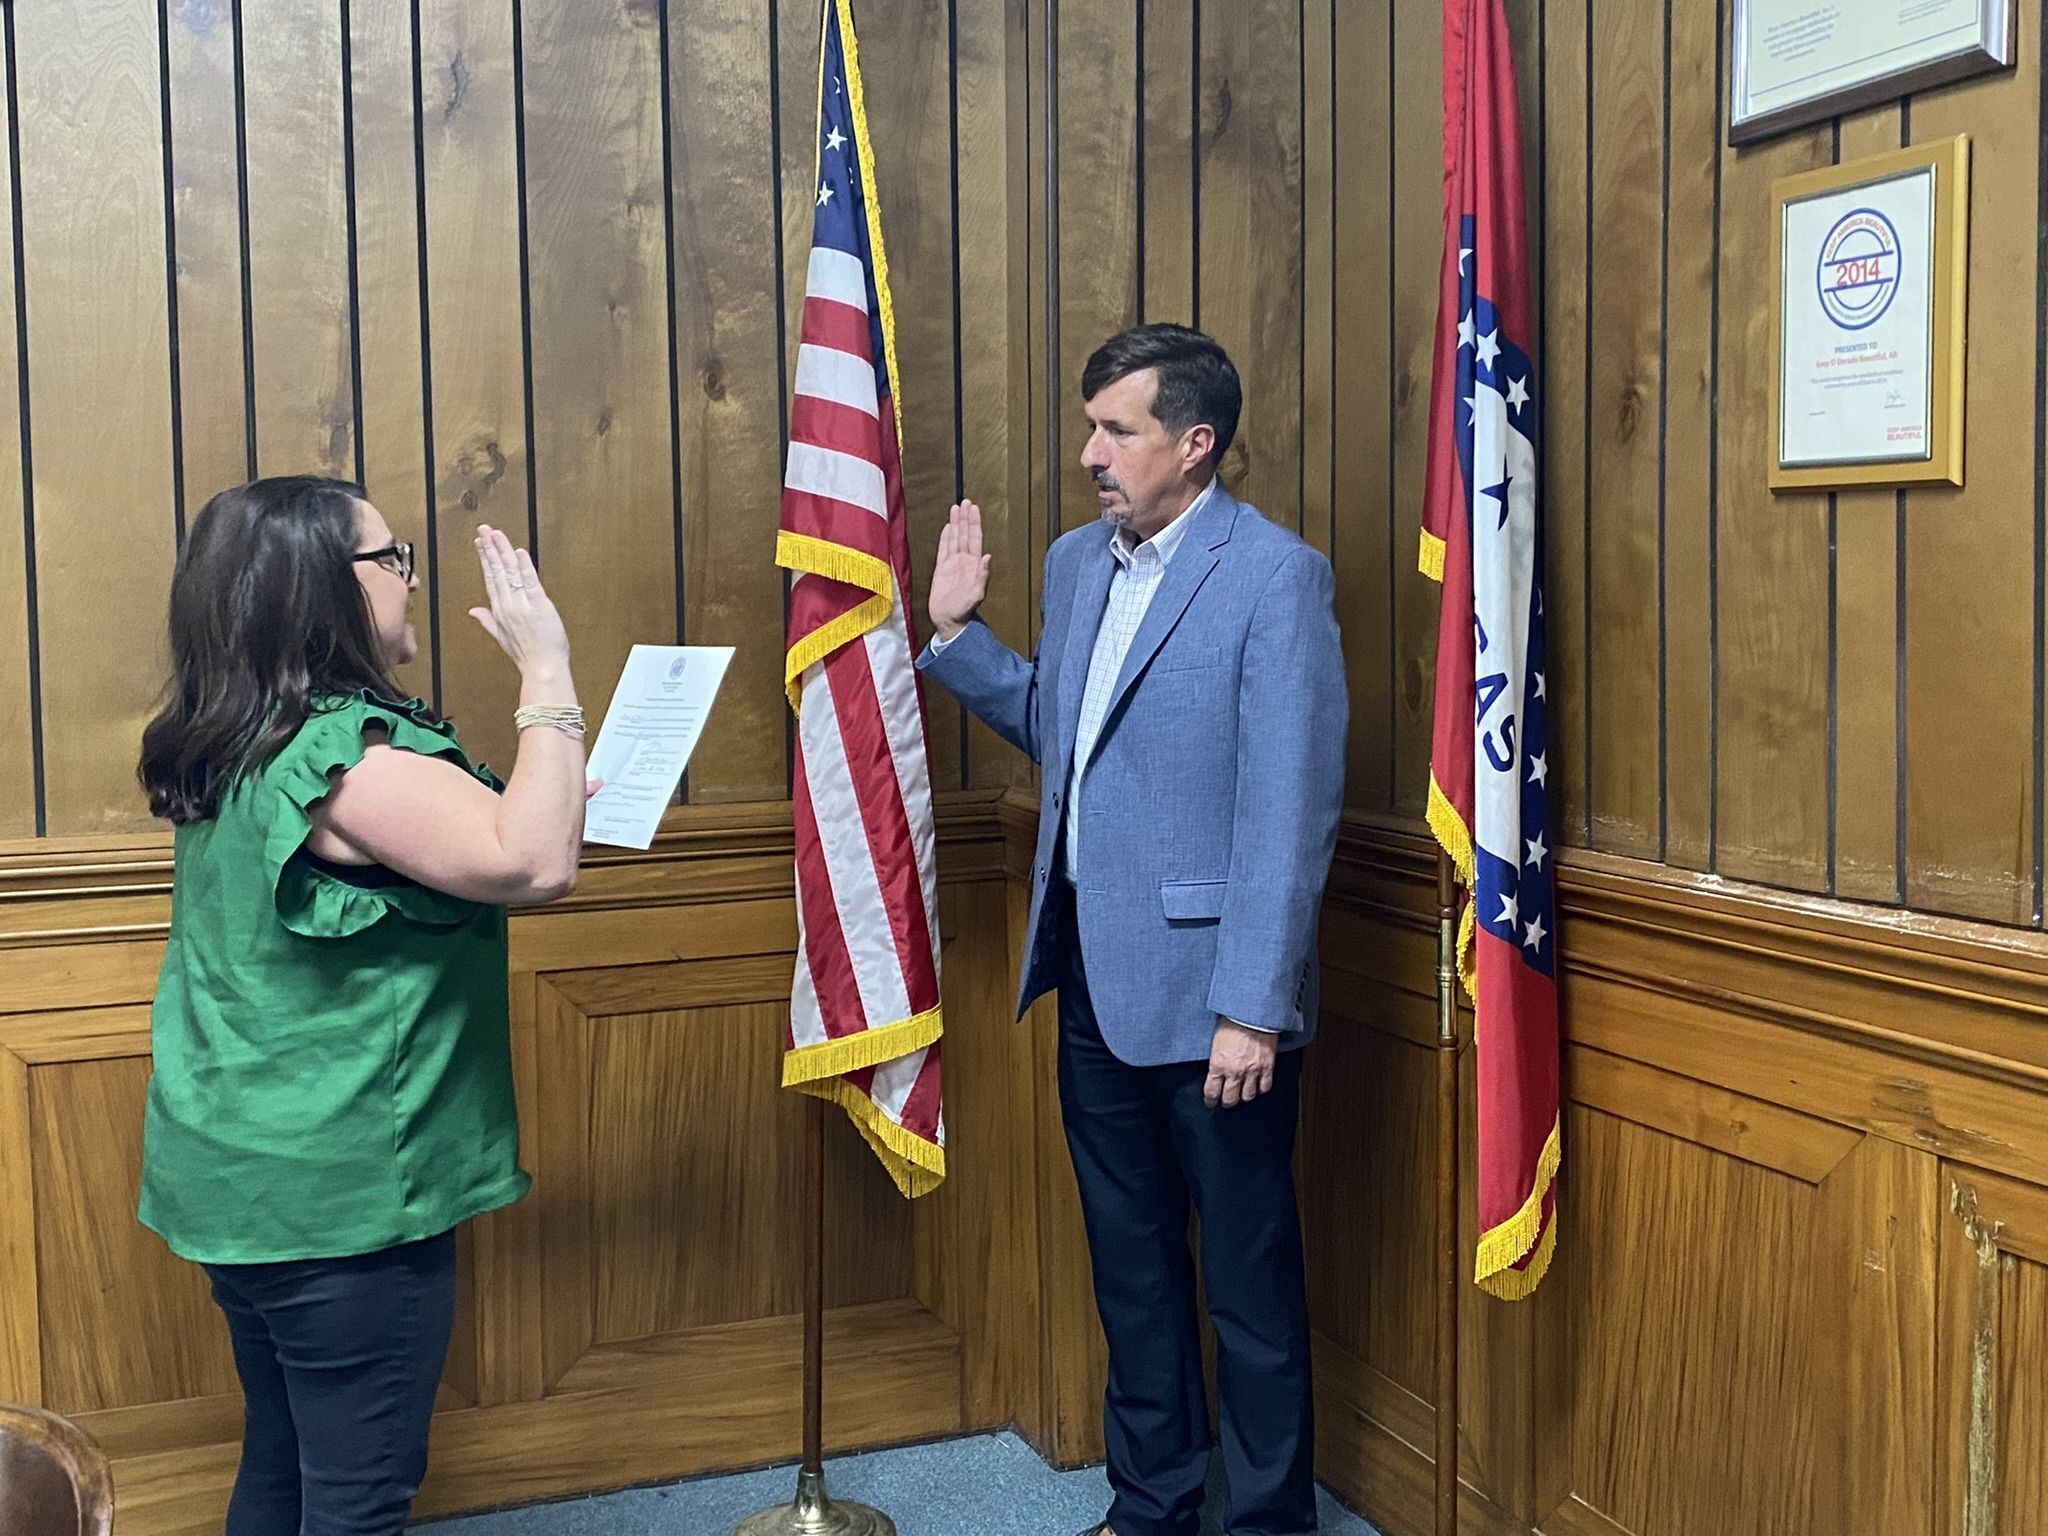 Dr. Jones sworn into a second term on the Governor’s Advisory Council on Aging